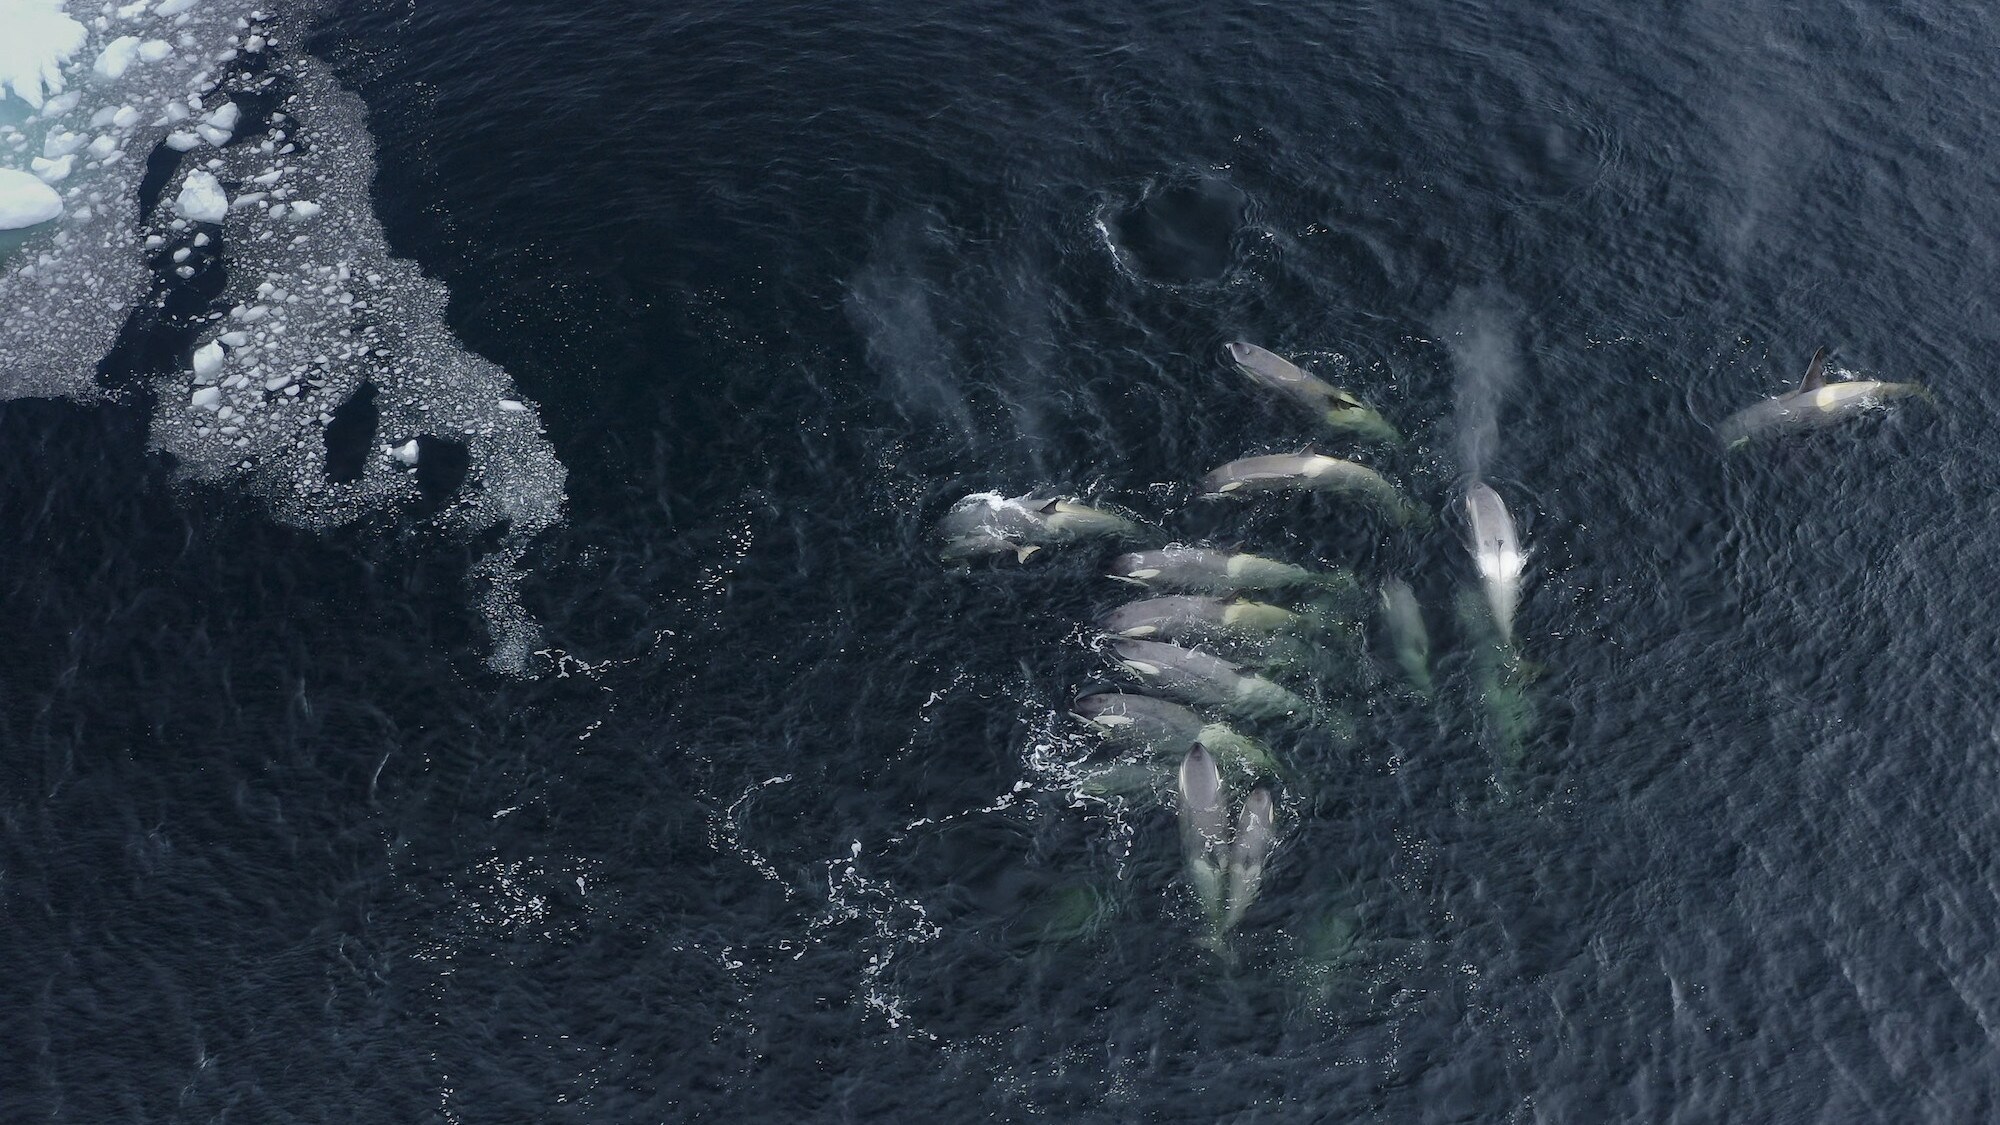 Aerial shot of a Pod of killer whales swimming towards an ice flow. (credit: National Geographic for Disney+/Bertie Gregory)